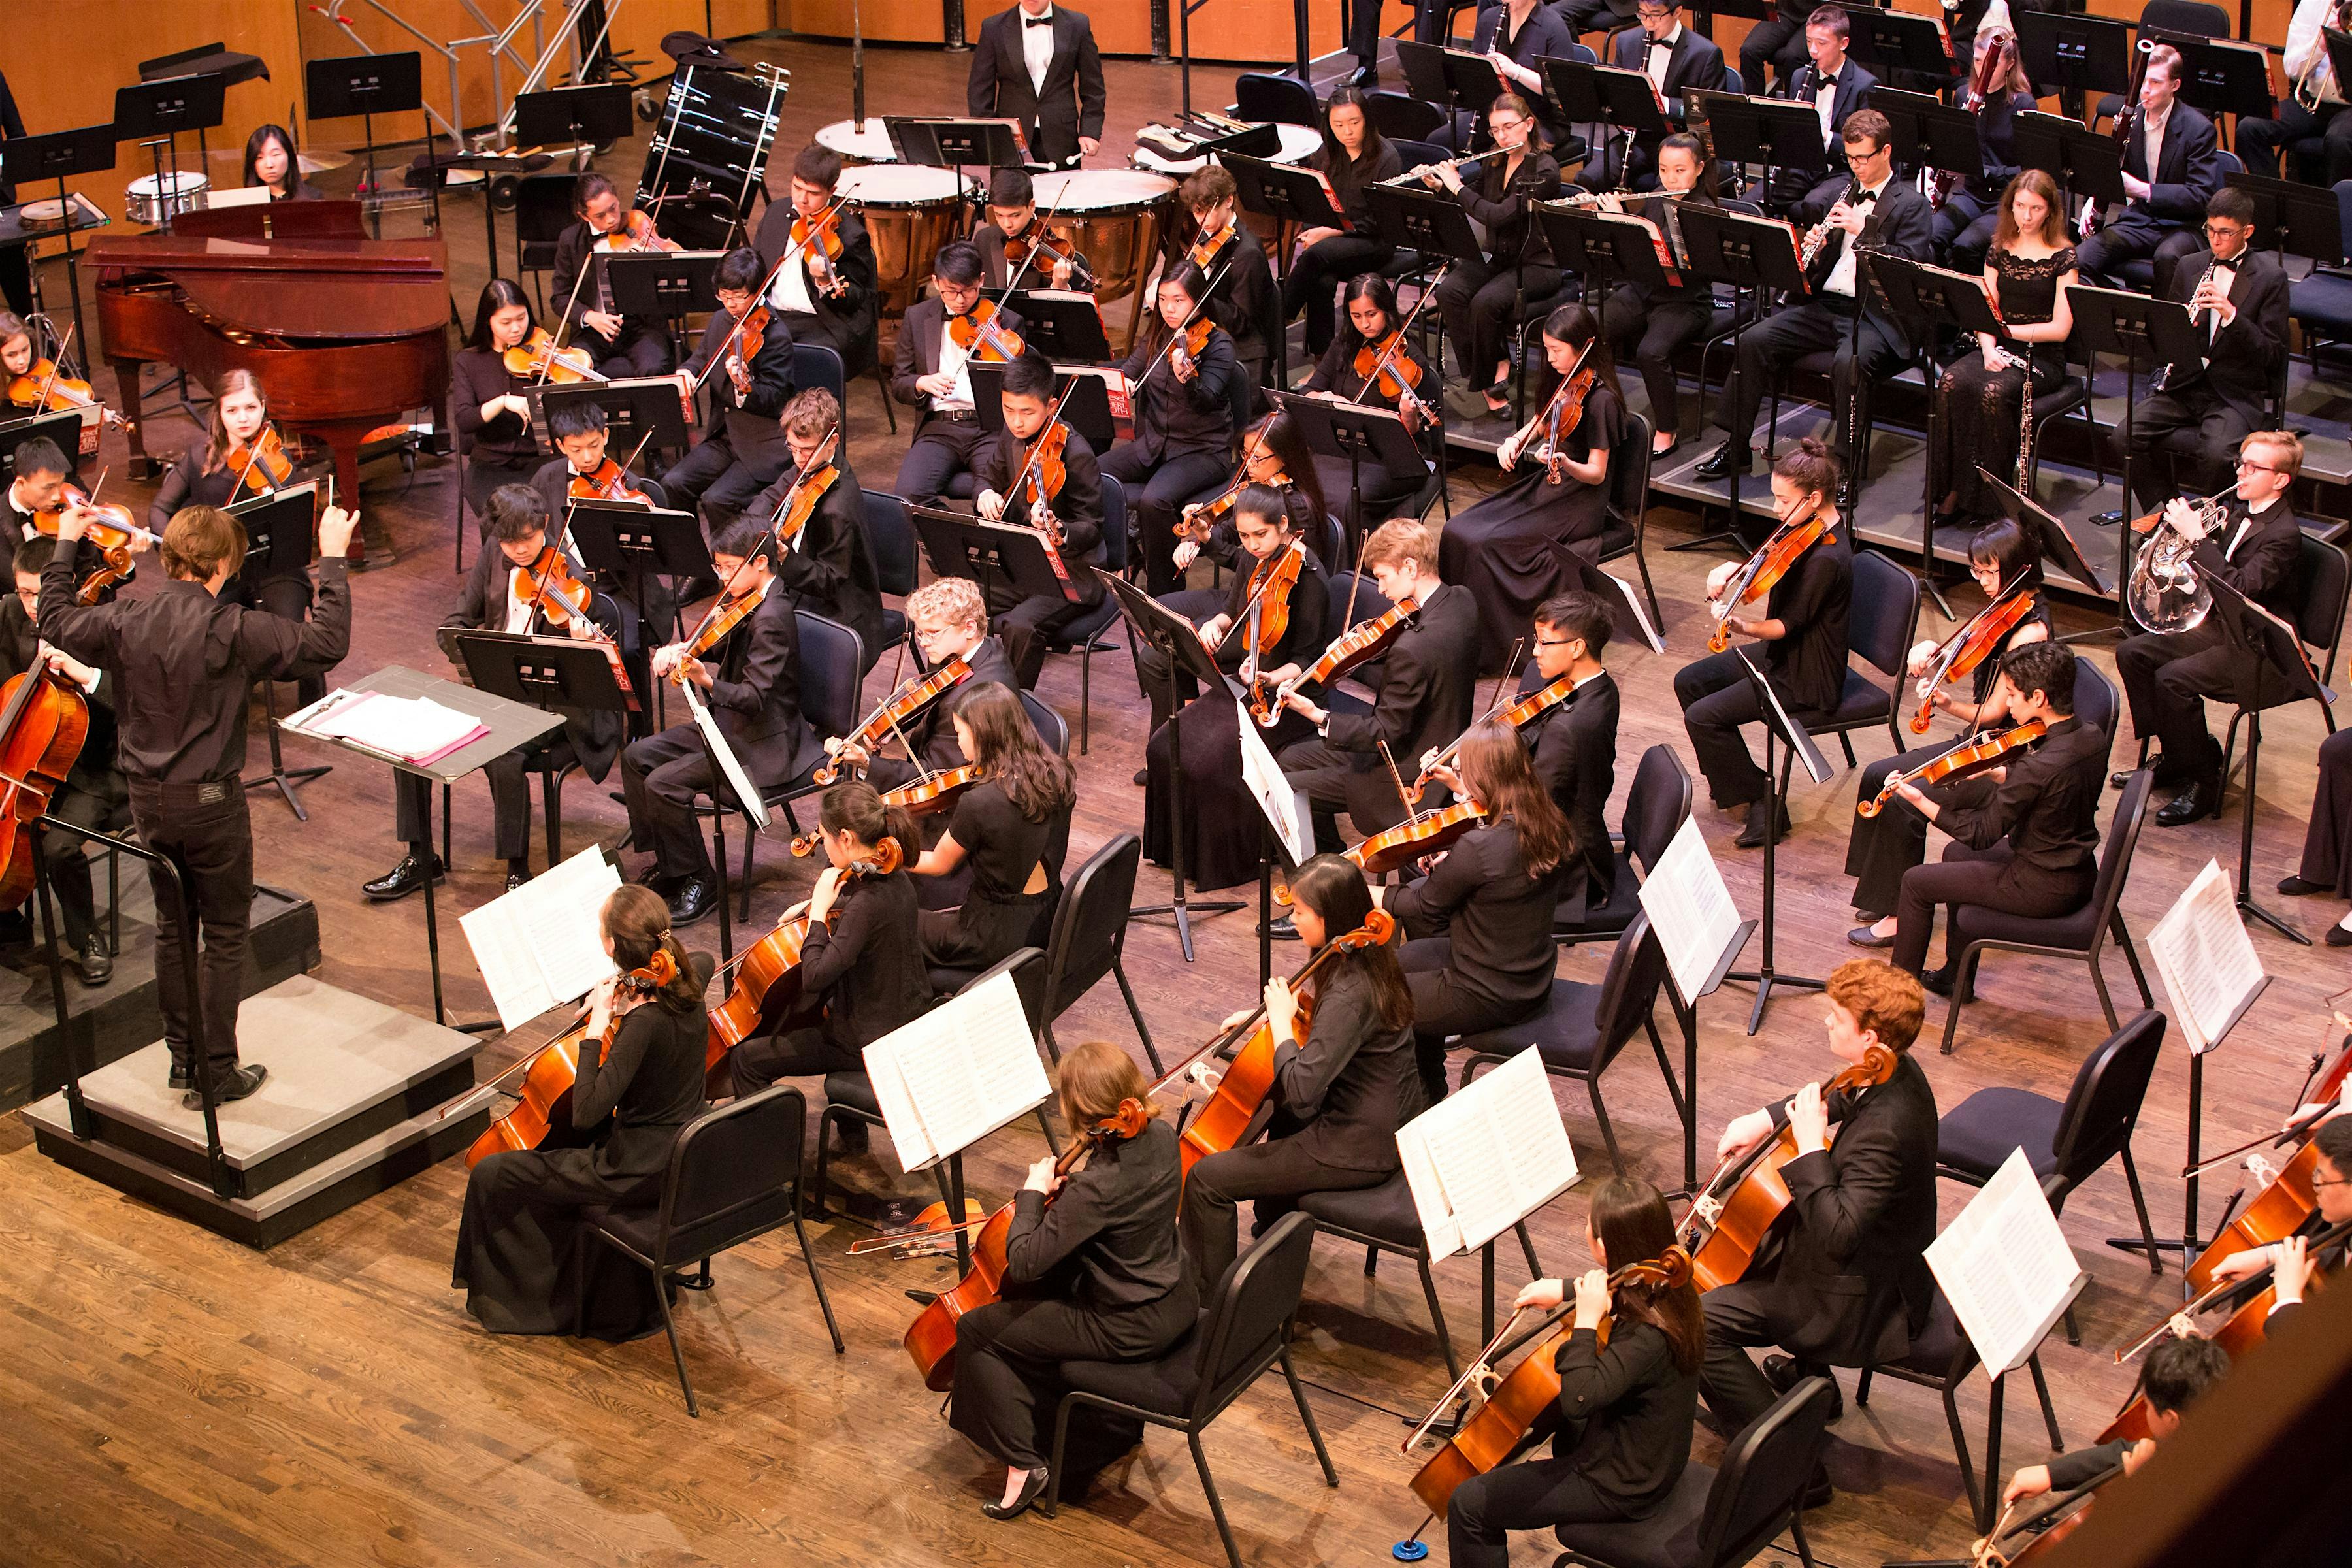 American Youth Concert & Symphonic Orchestras in Concert